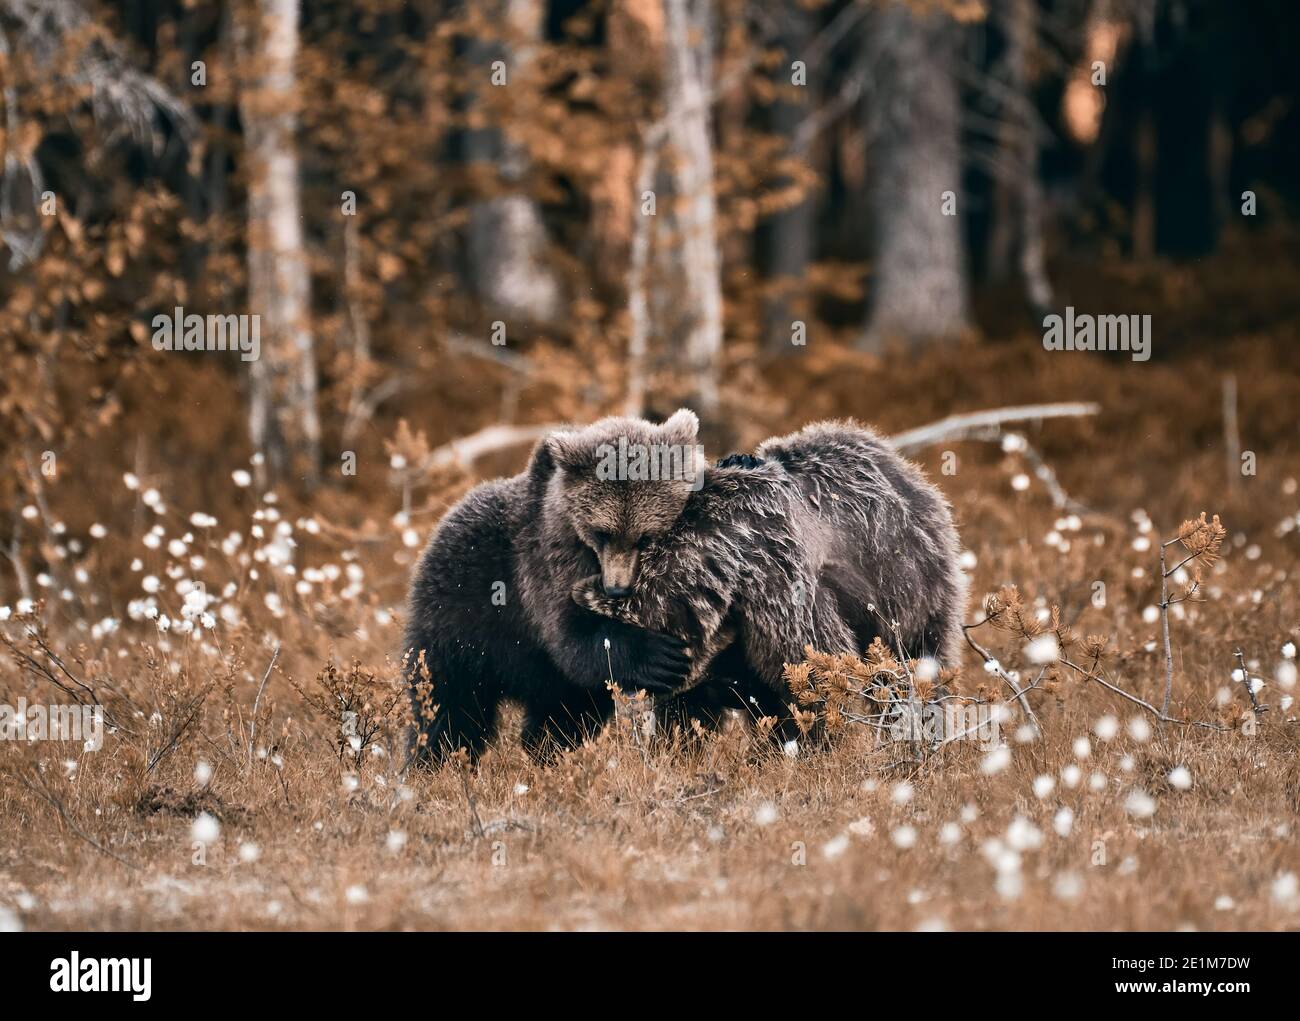 One young brown bear hugs and comforts another bear at edge of forest in Eastern Finland on summer evening. Stock Photo